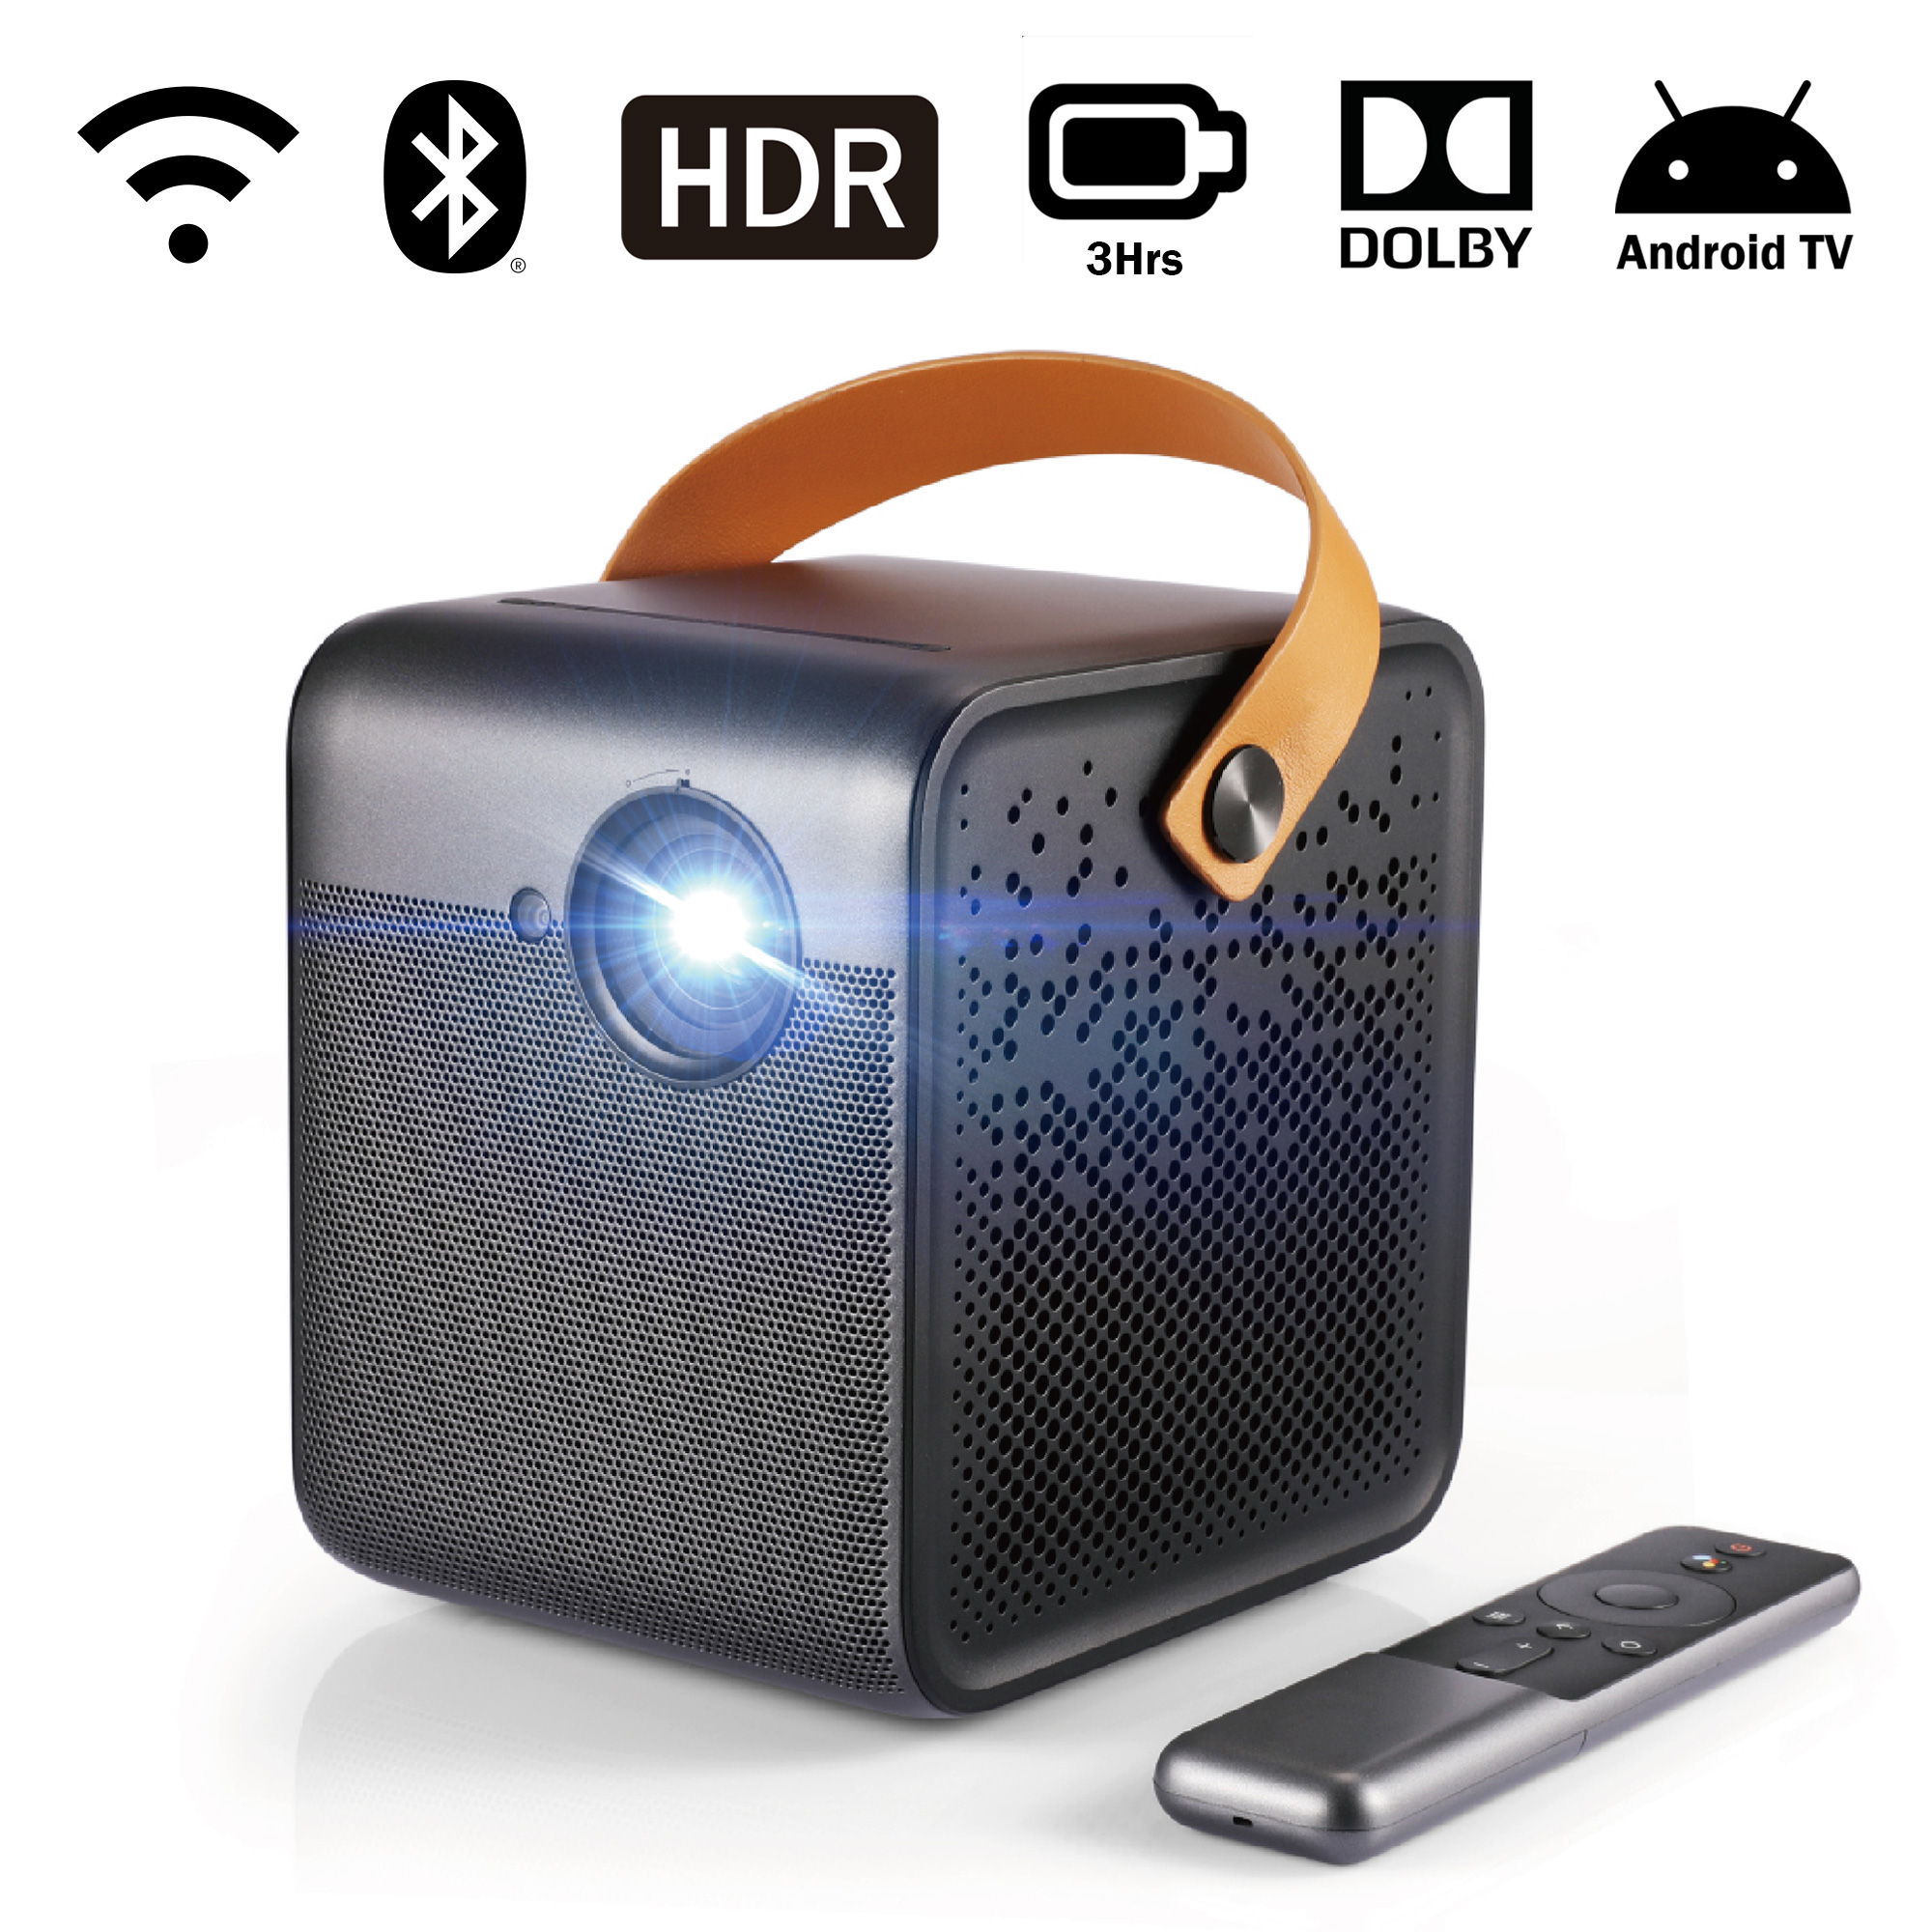 WEMAX Dice Outdoor Portable Projector, Android TV Movie Projector, 3 Hours Battery, 700 ANSI Lumens, Mobile Theater, WiFi Bluetooth HDMI USB, Dolby Audio DTS-HD, Auto Focus, Auto Keystone - image 1 of 10